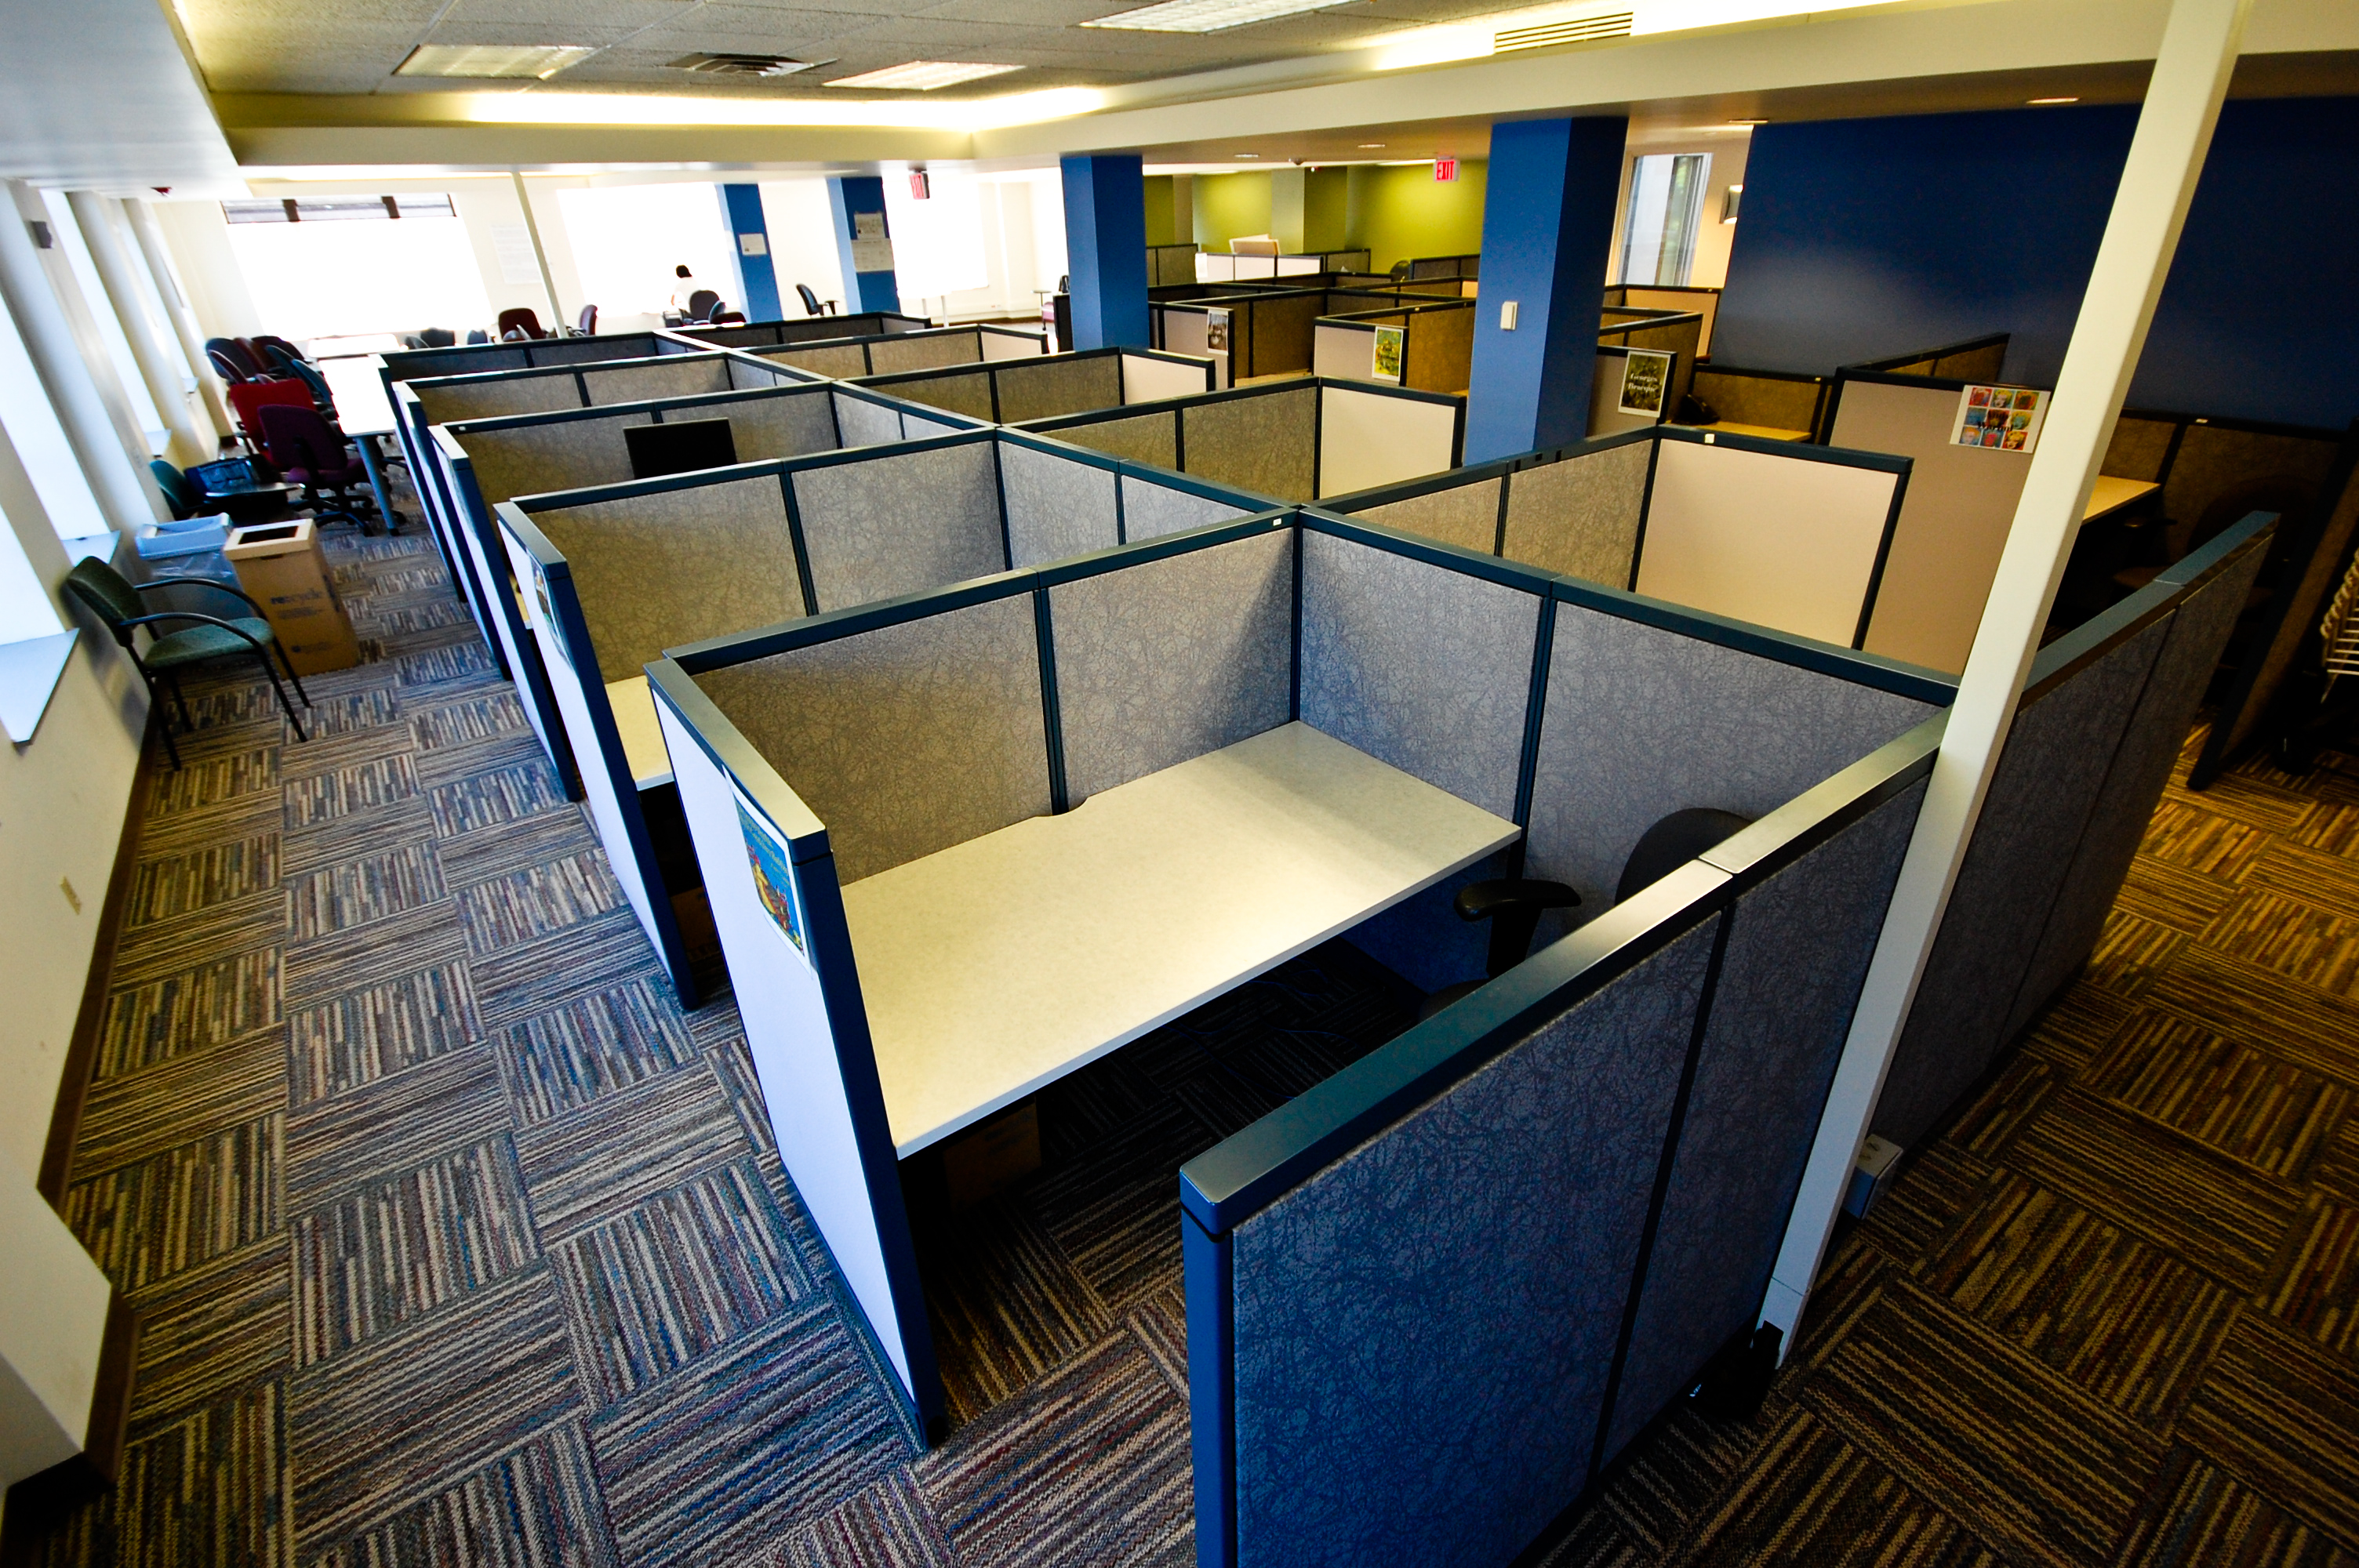 3 Reasons to Buy Used Office Furniture | Capital Choice Office Furniture